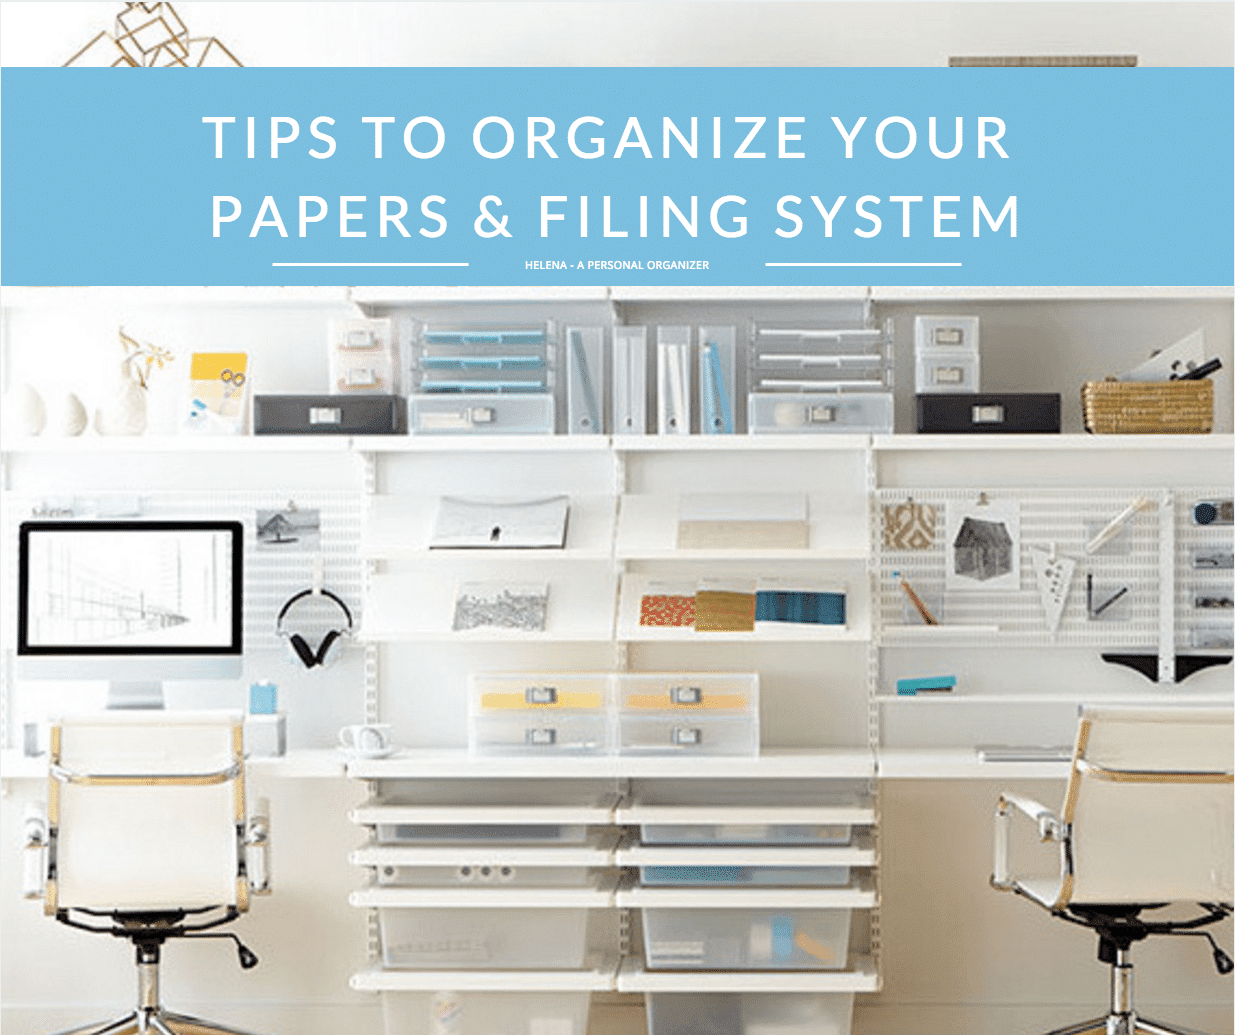 Tips to Organize Your Papers & Filing System